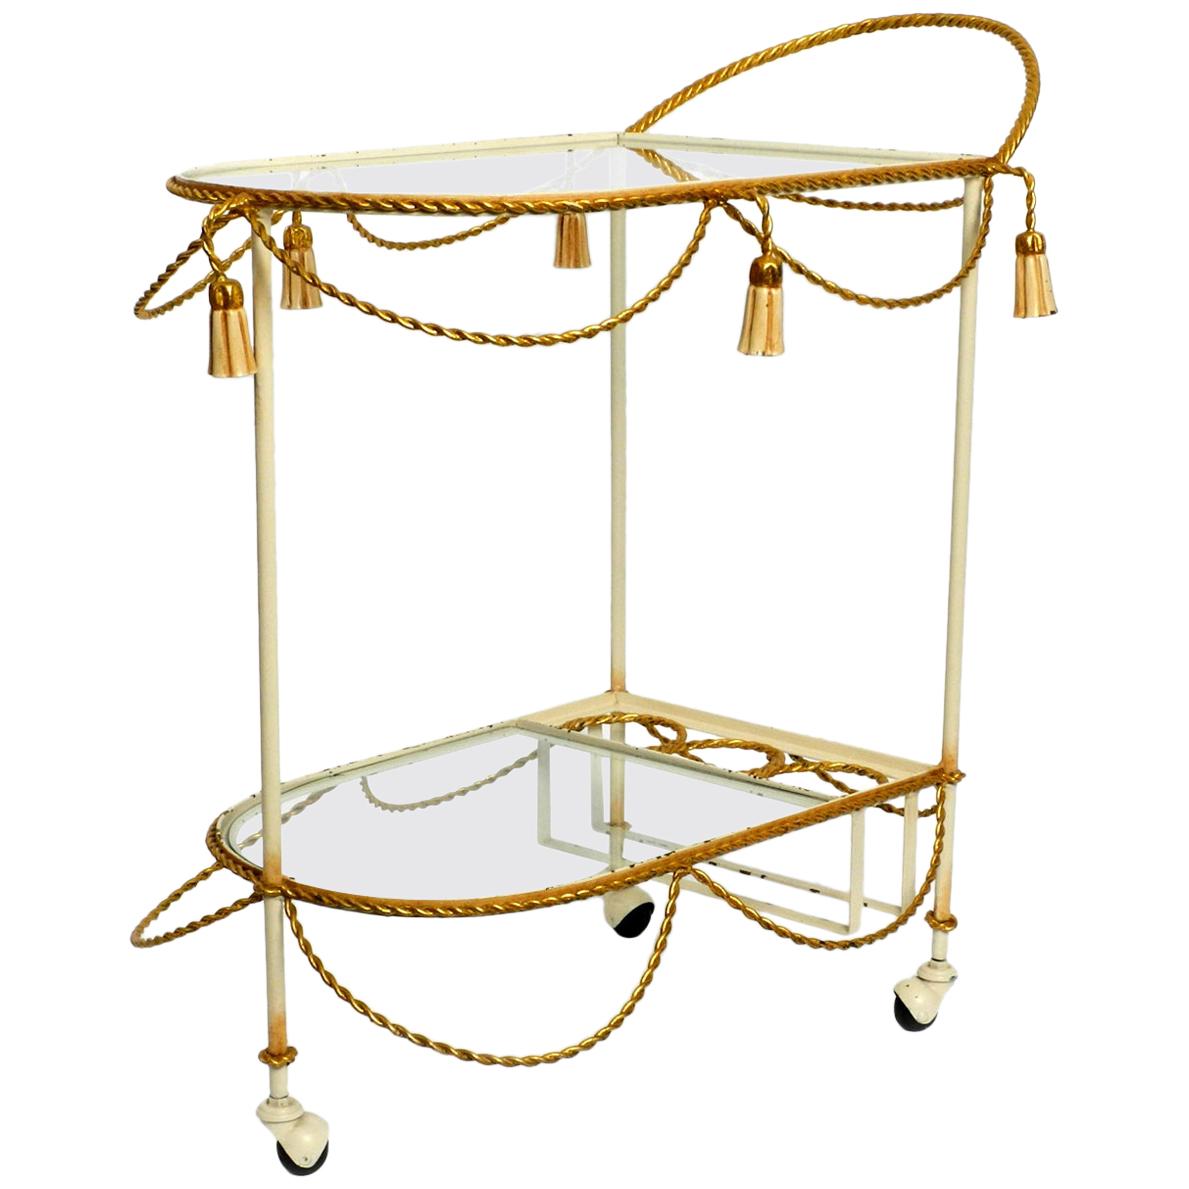 Italian Midcentury Bar Cart Made of Metal in Beige and Gold with Glass Elements For Sale